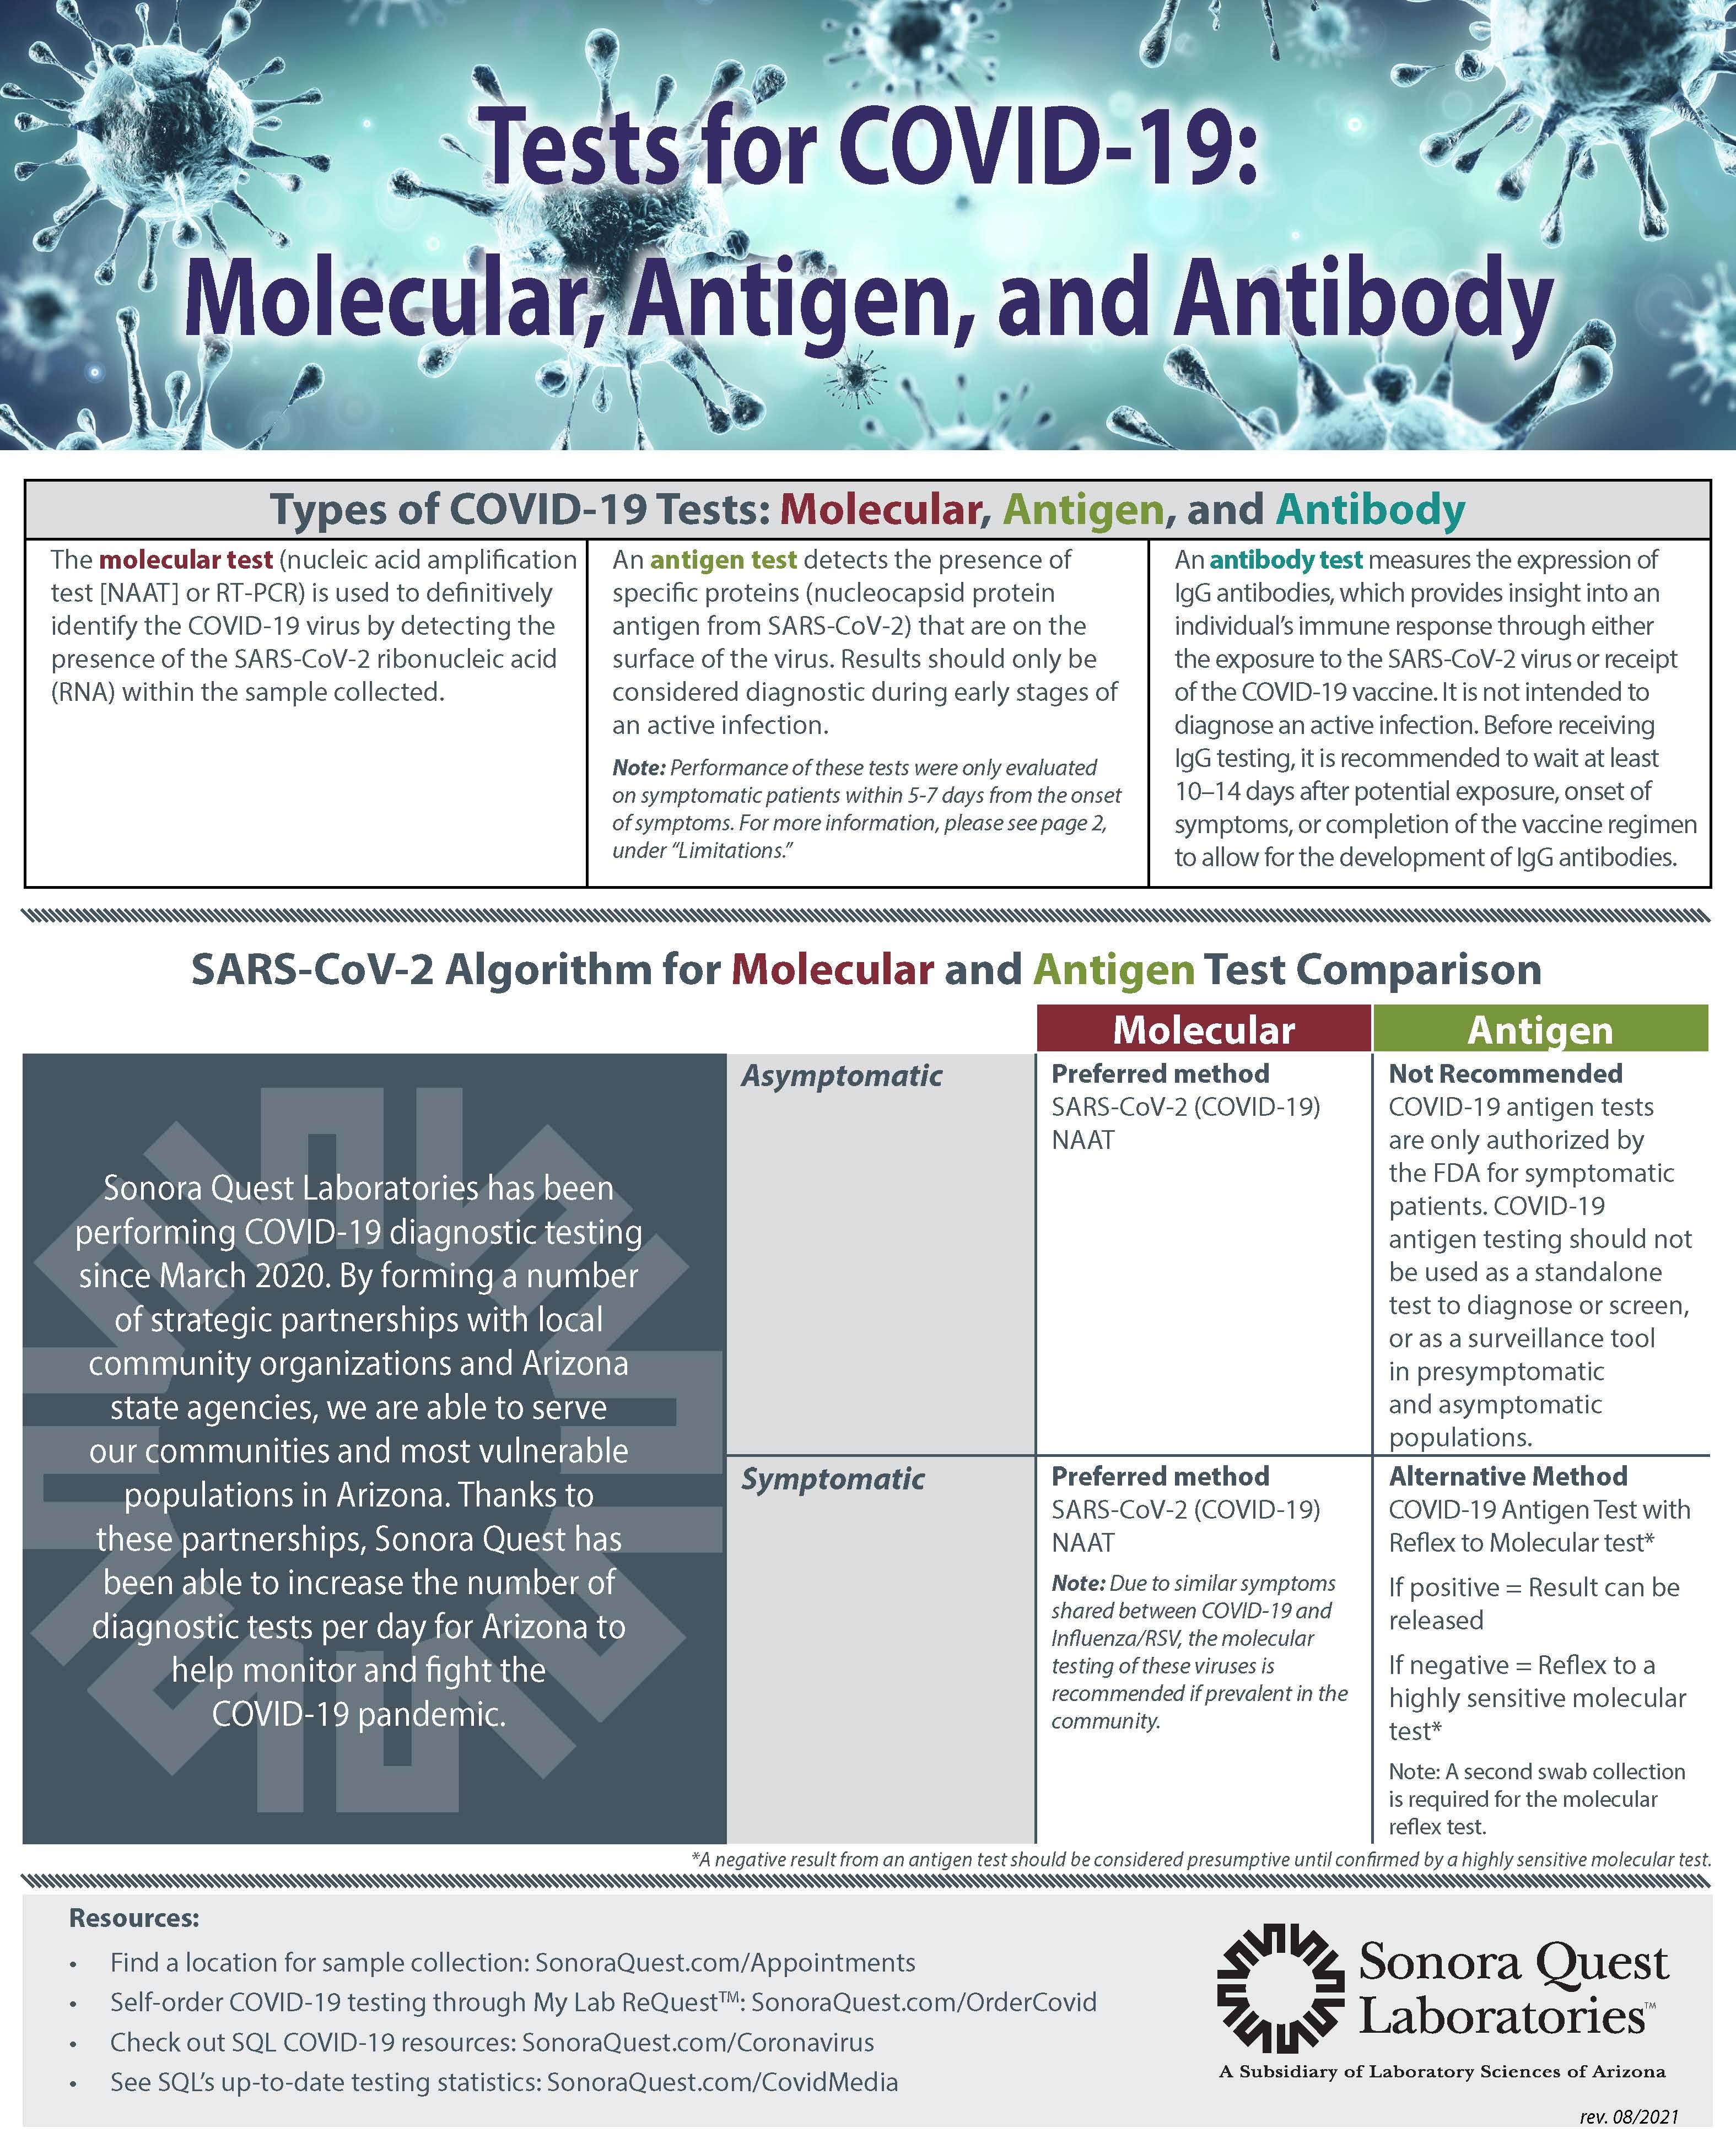 Tests for COVID-19 - Molecular, Antigen, and Antibody - Page 1